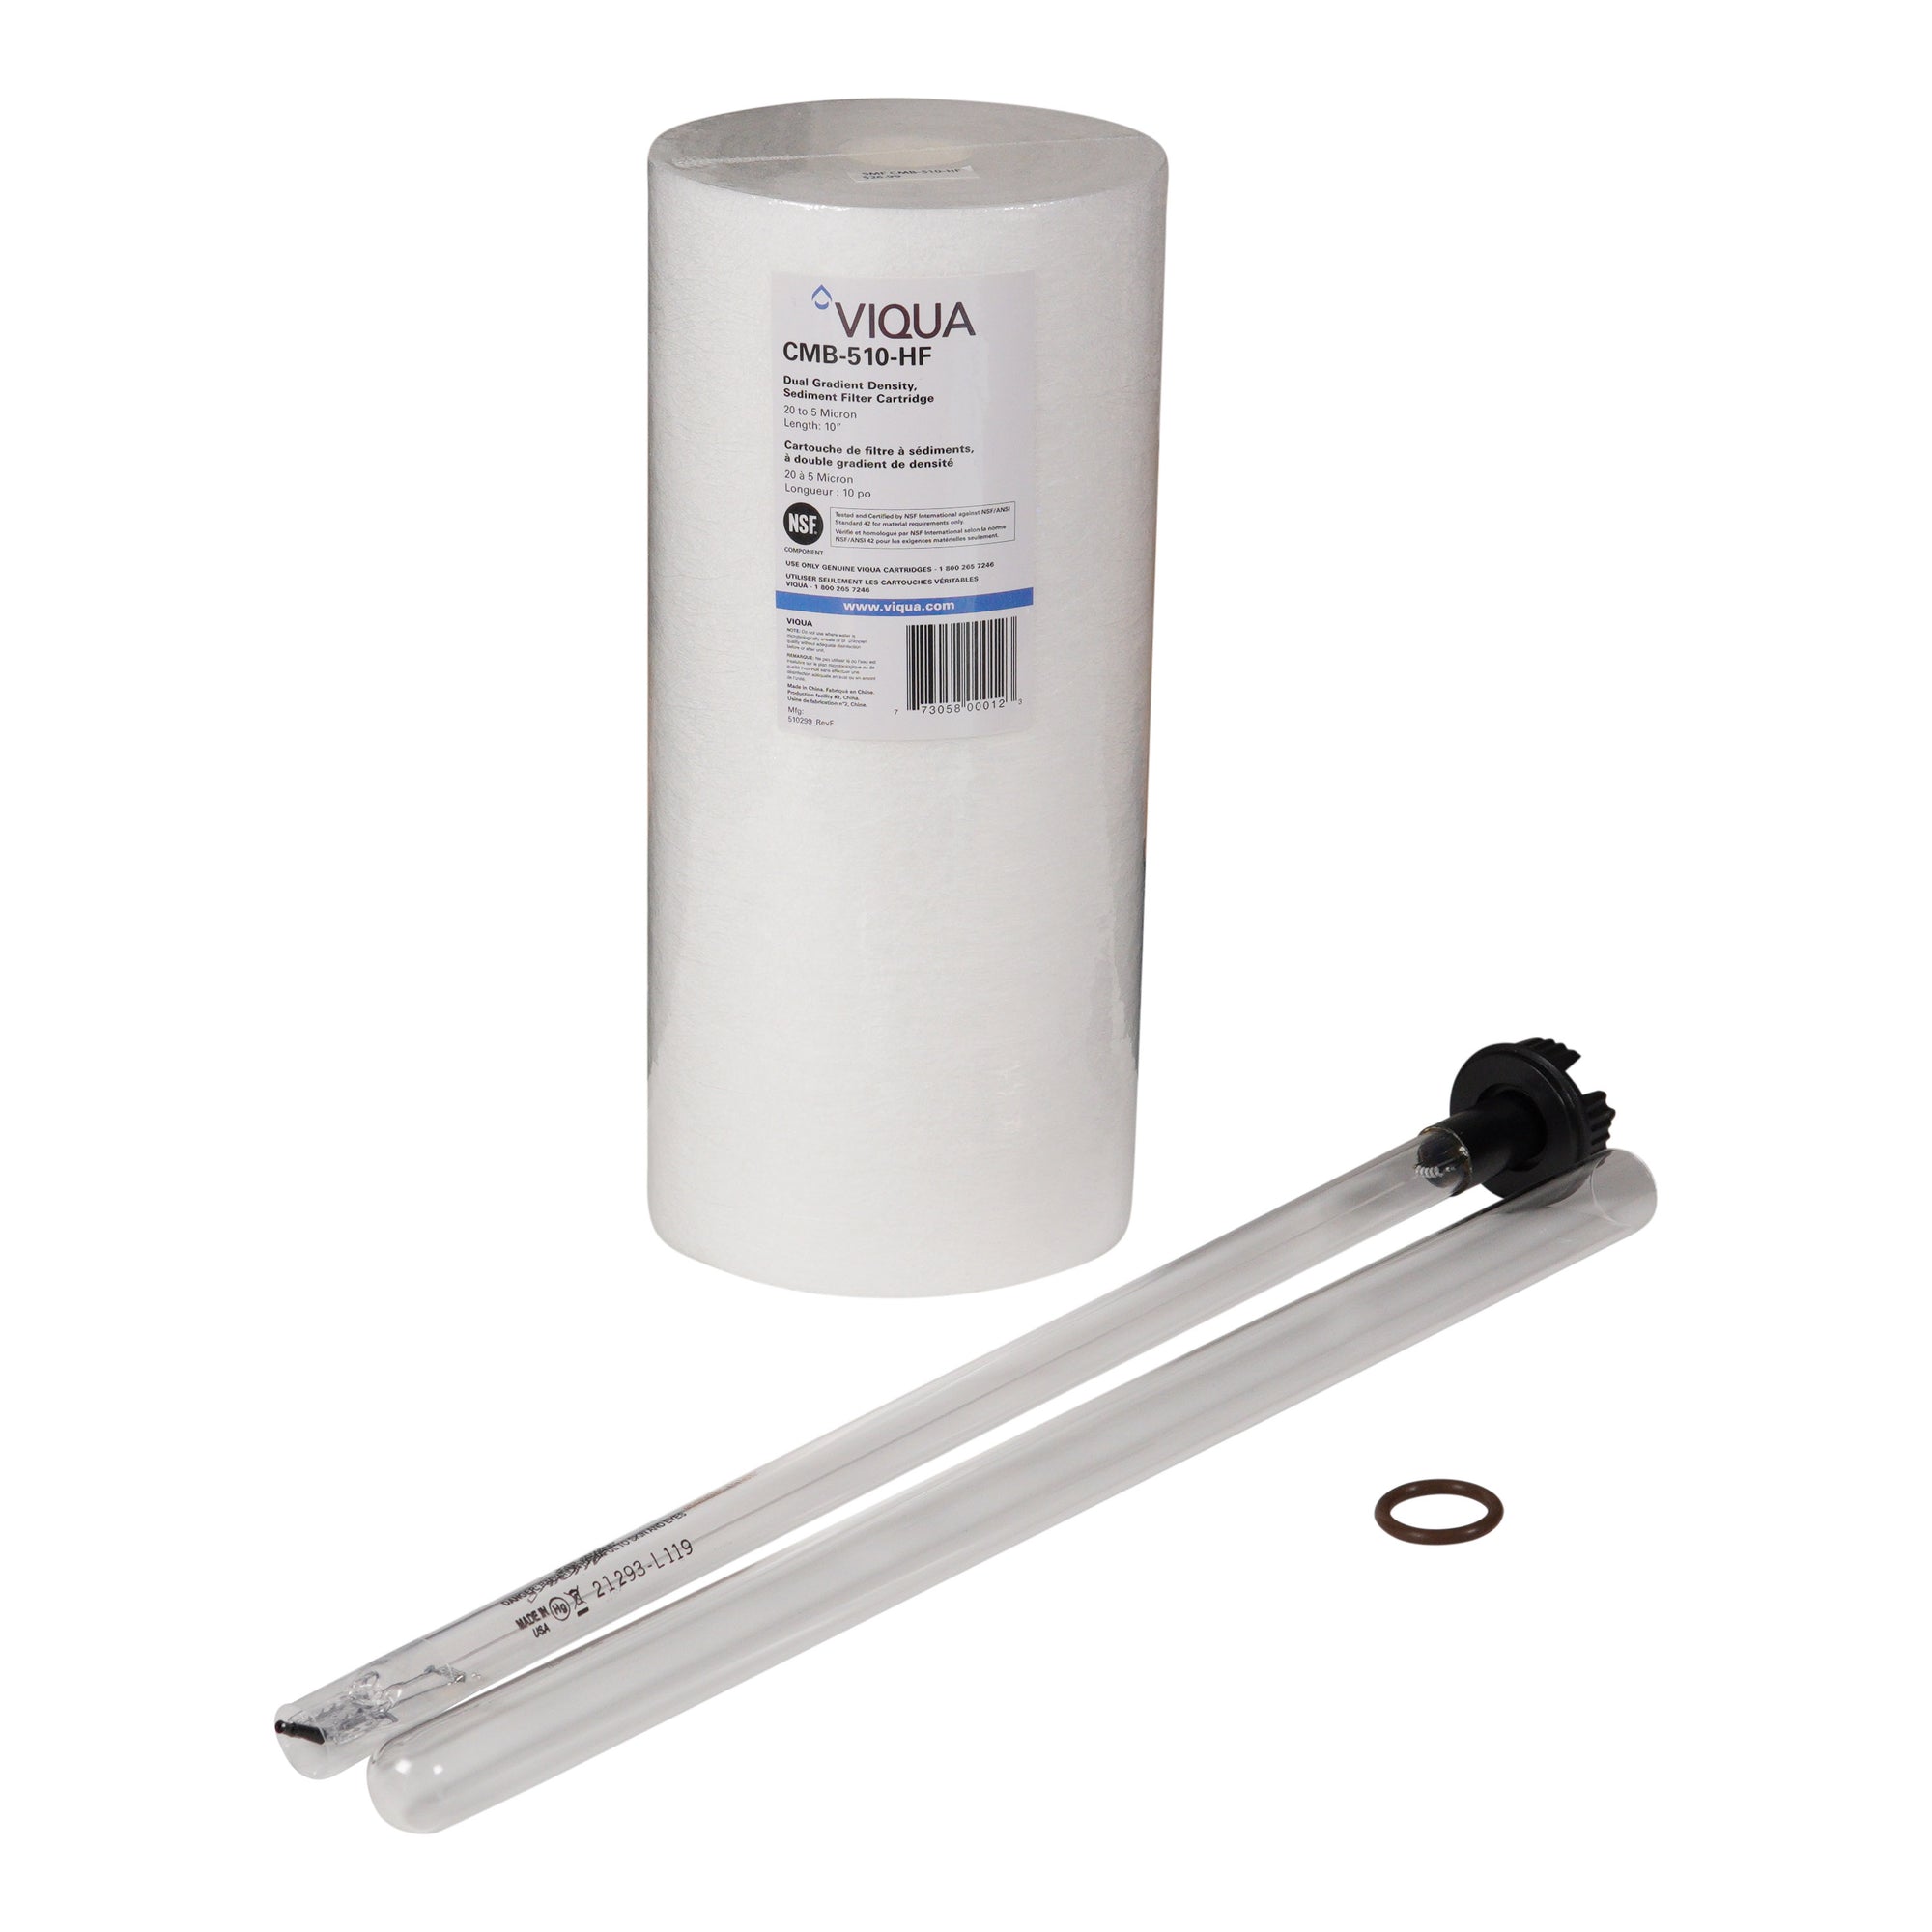 Copy of Viqua IHS10-D4 Genuine Replacement UV Lamp, Sleeve and Filter